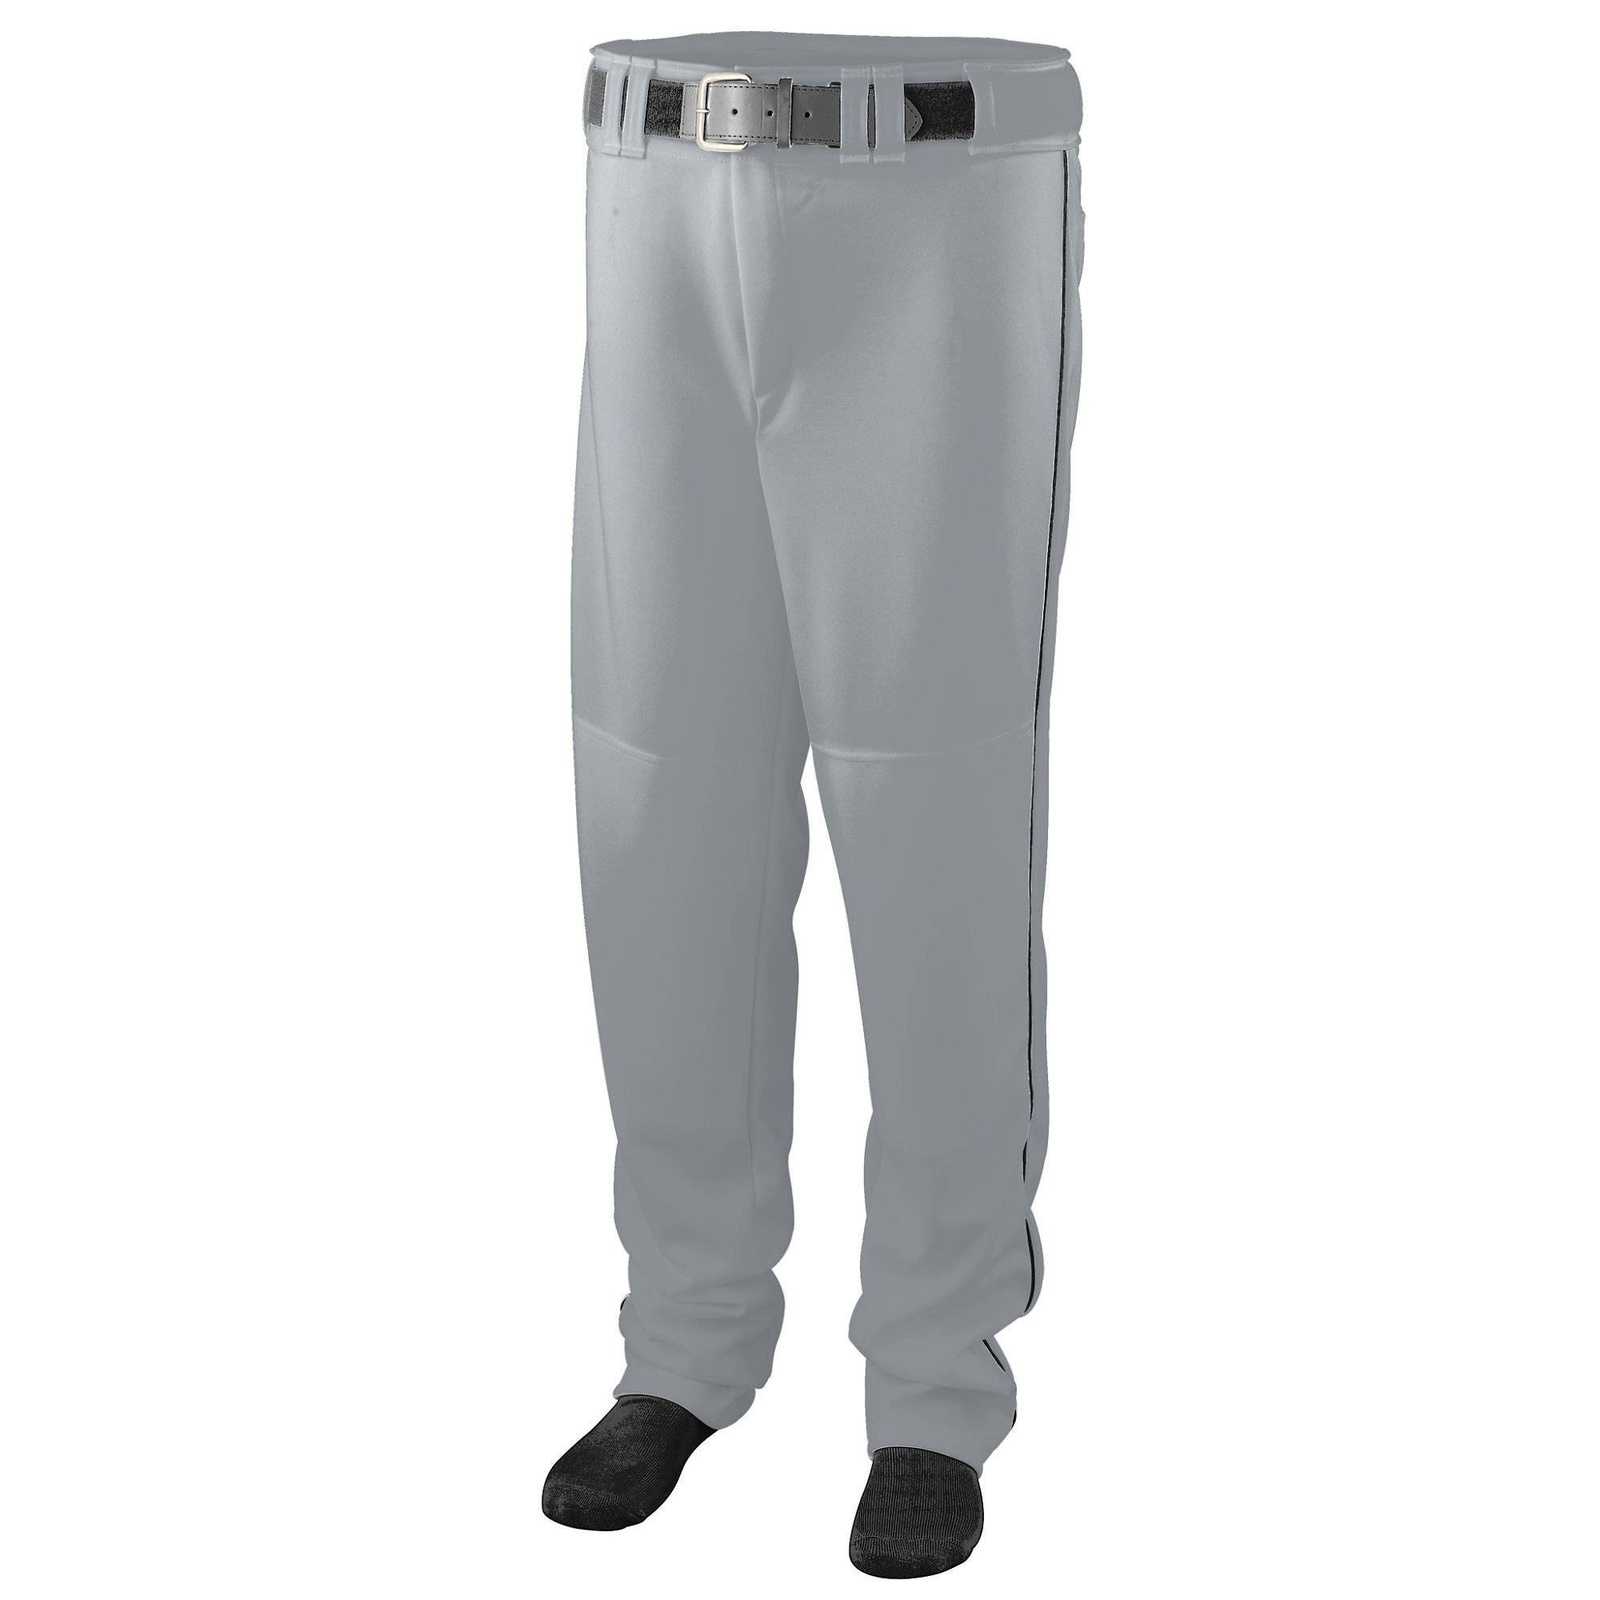 Augusta 1446 Series Baseball Softball Pant with Piping Youth - Gy Bck - HIT a Double